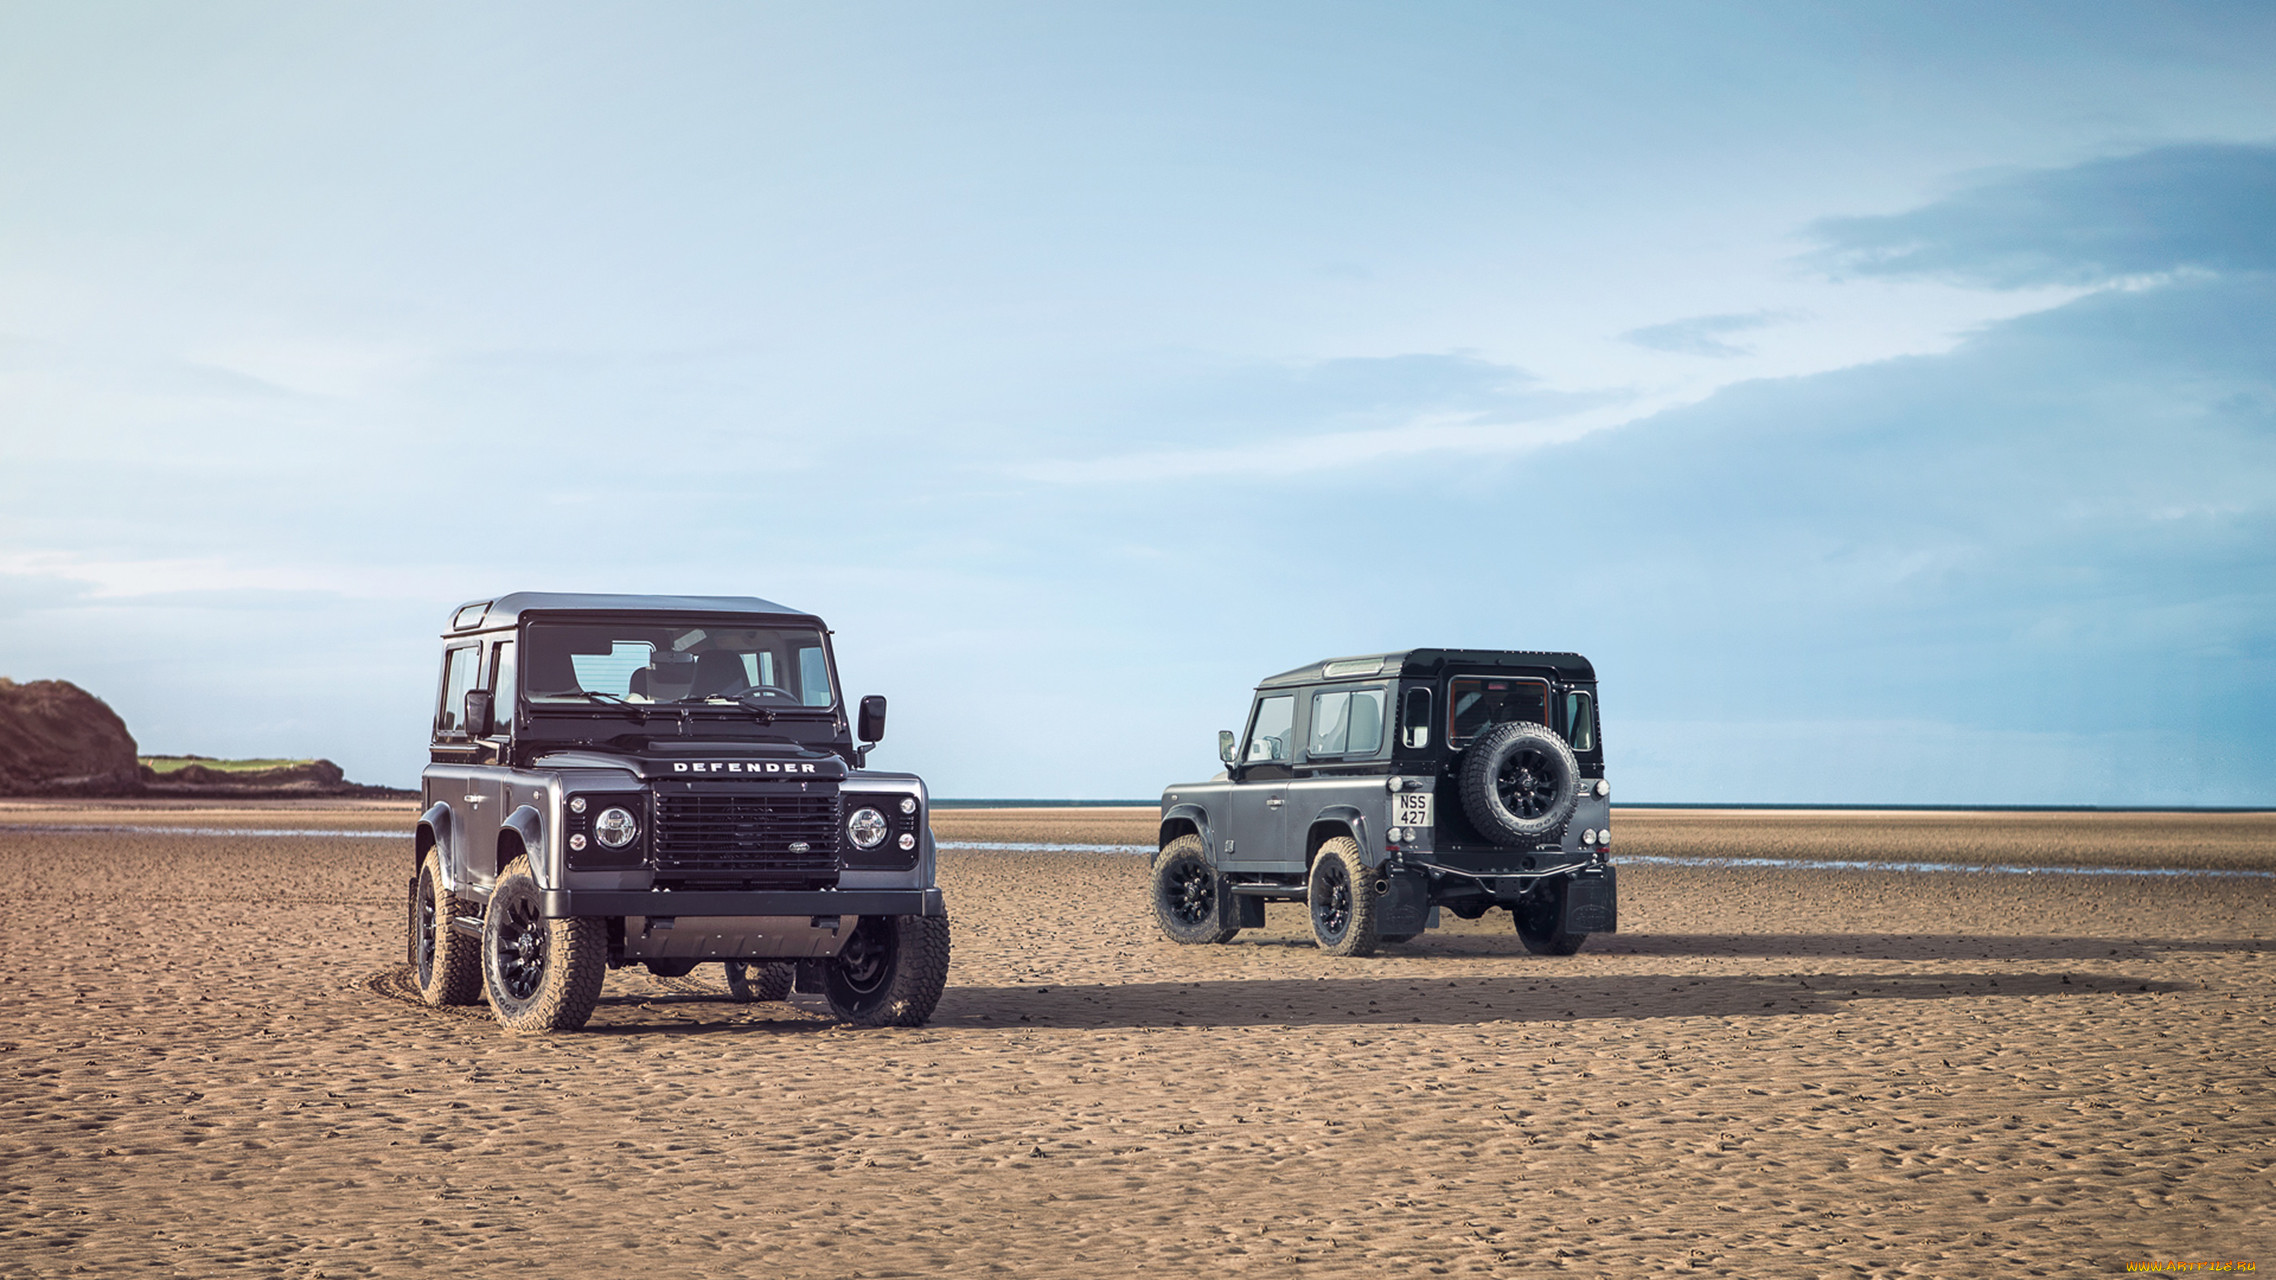 land-rover defender autobiography edition 2015, , land-rover, 2015, edition, autobiography, defender